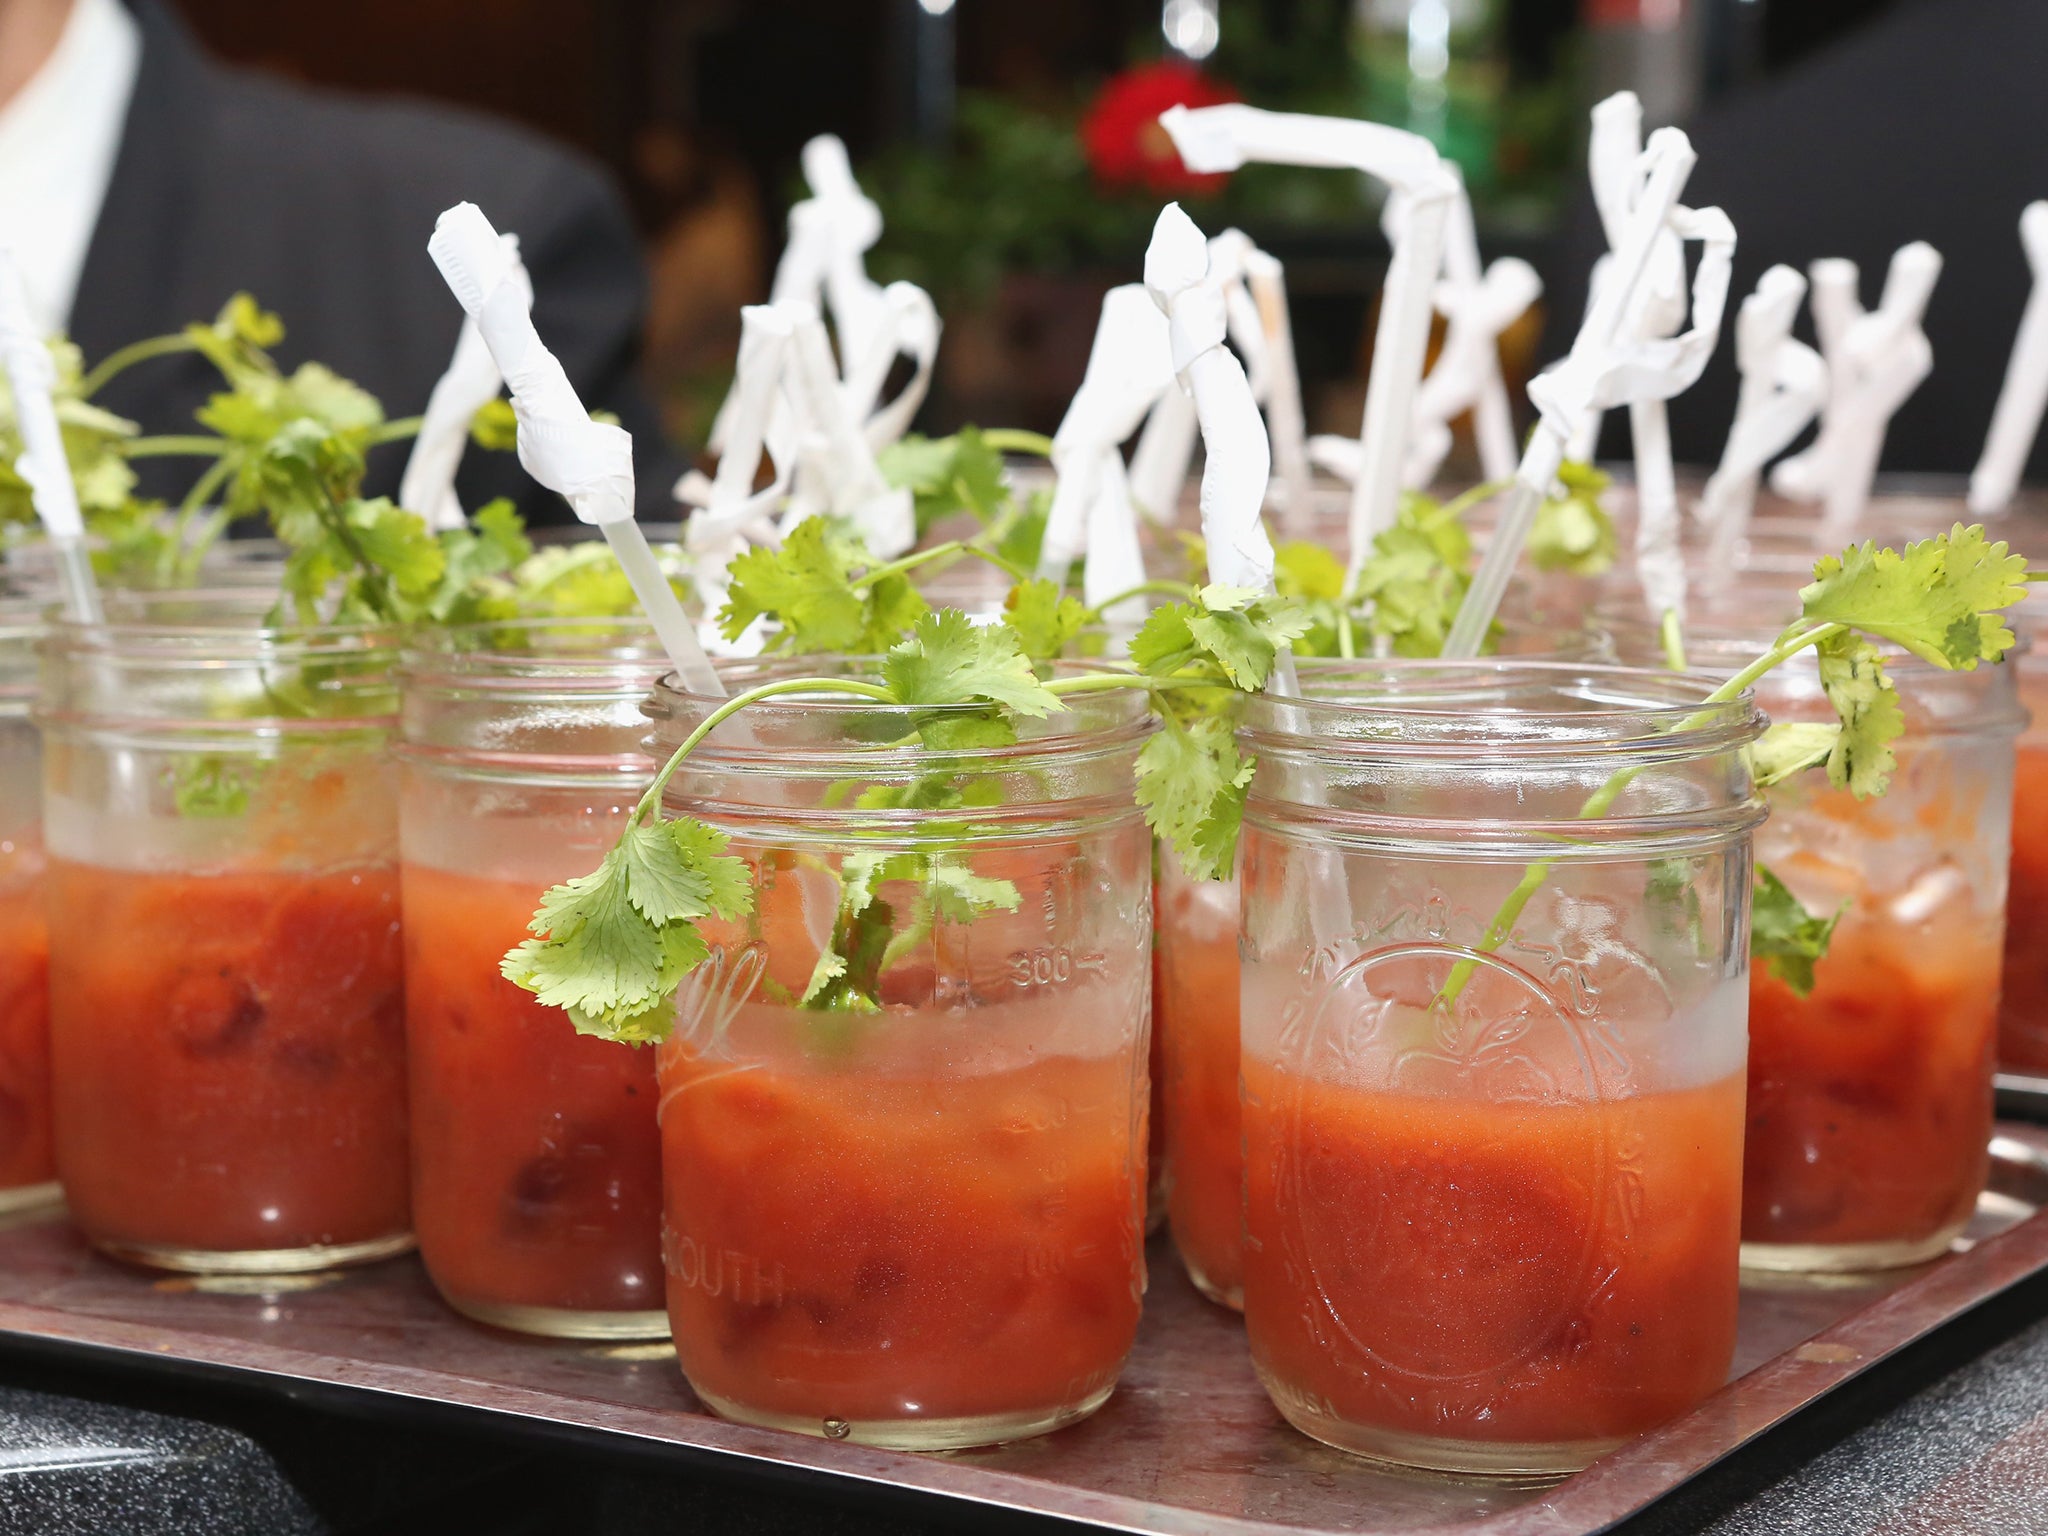 Breakfast of champions: Bloody Marys are a brunch staple